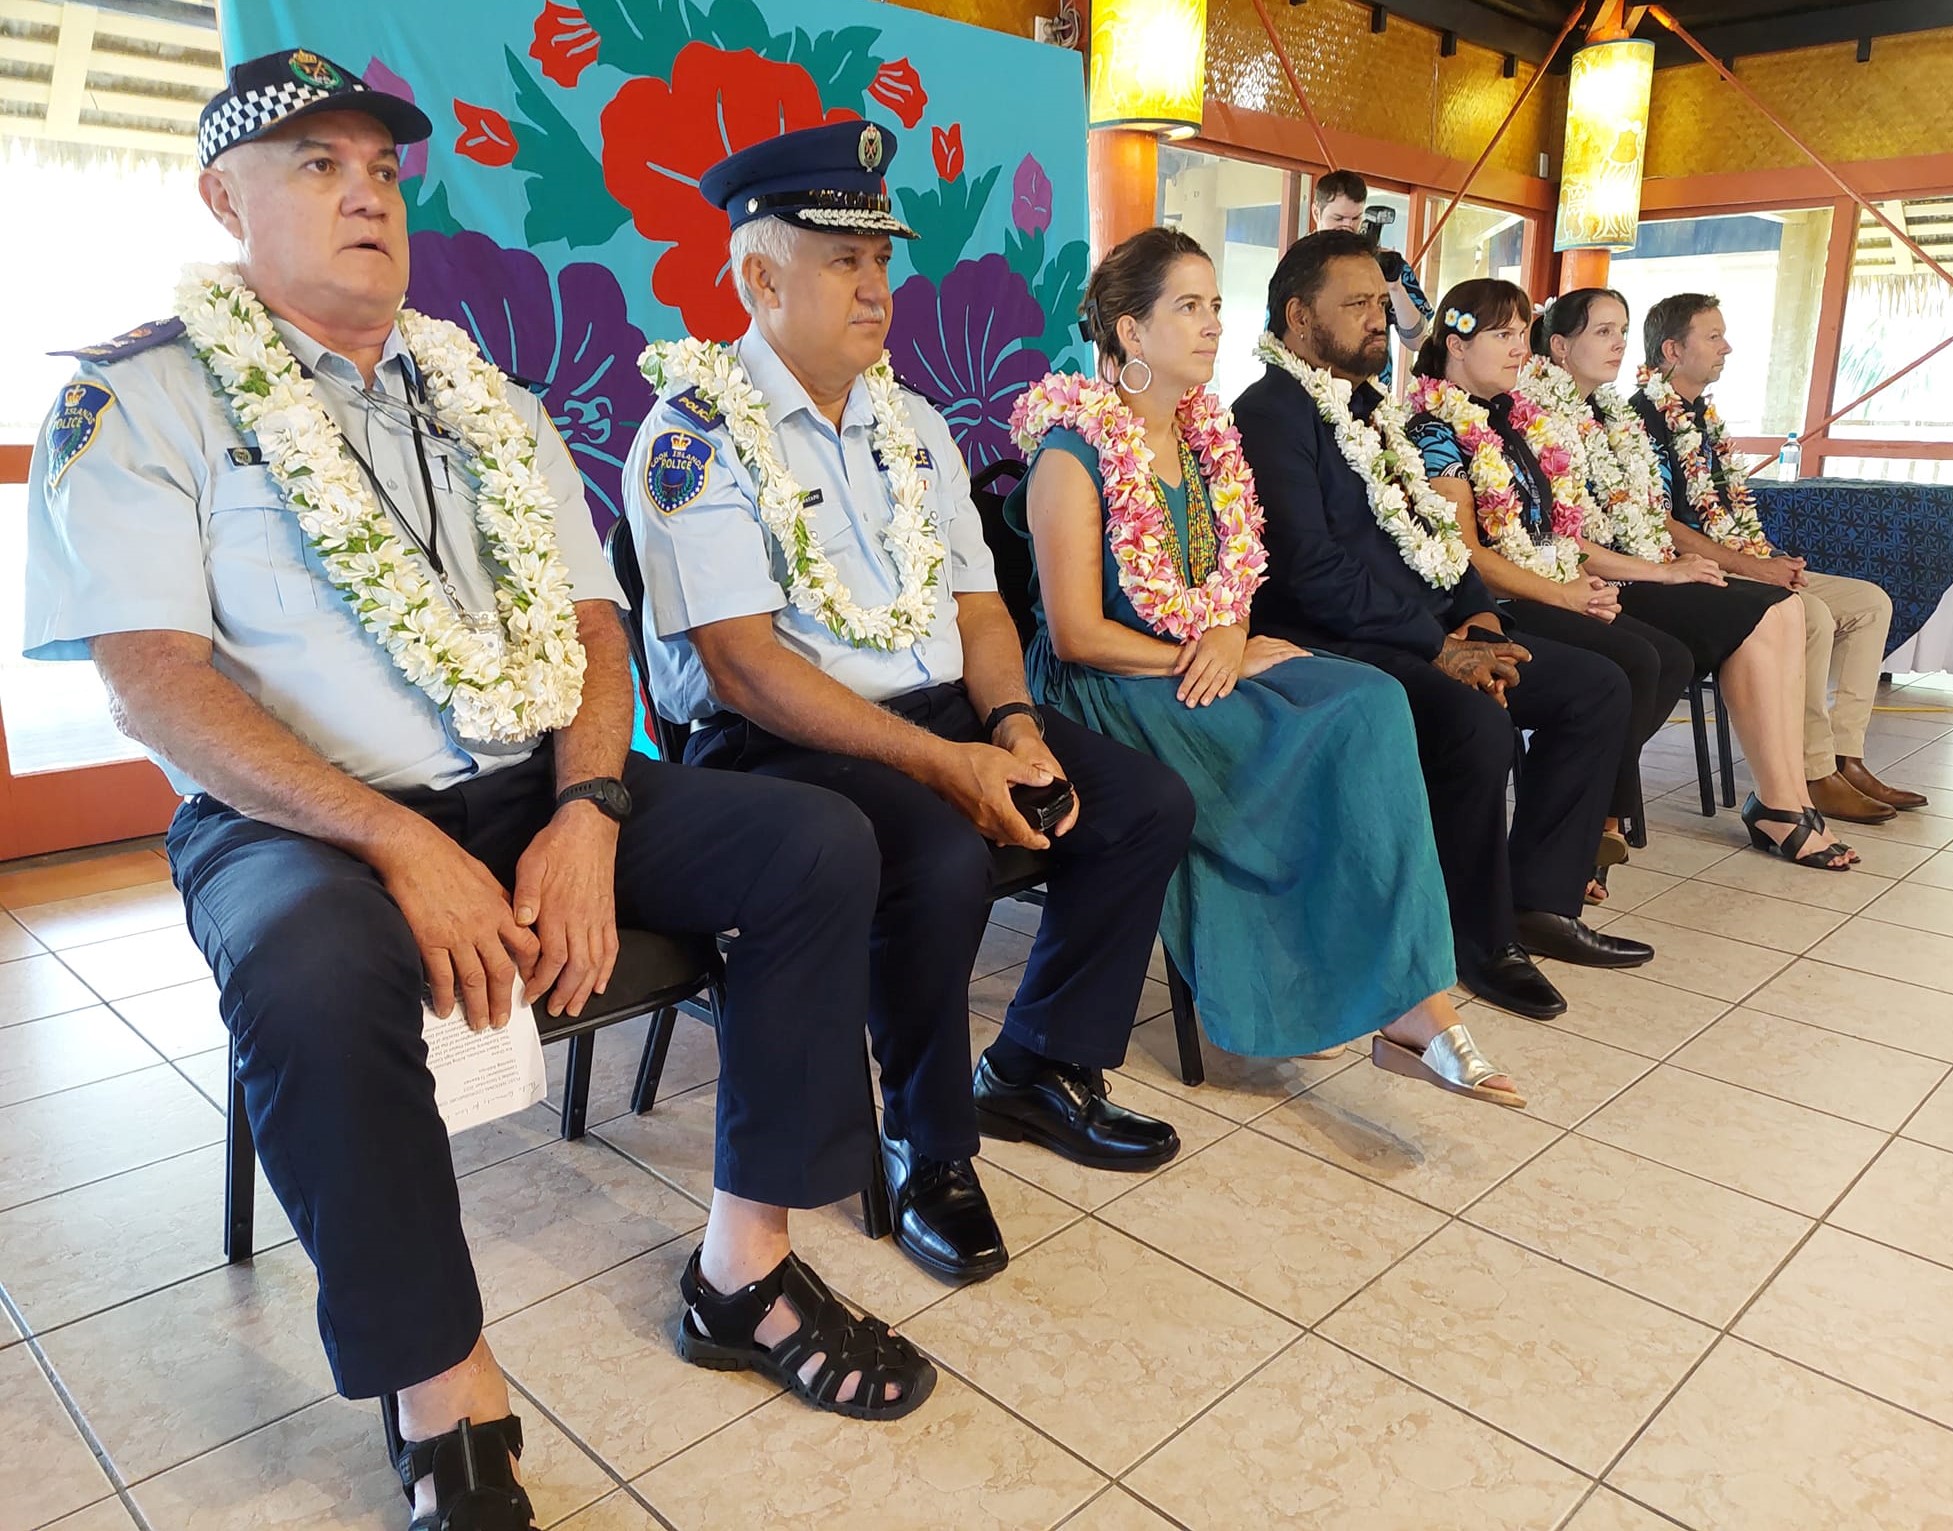 Pacific police unite to build networks and capability for a safer region